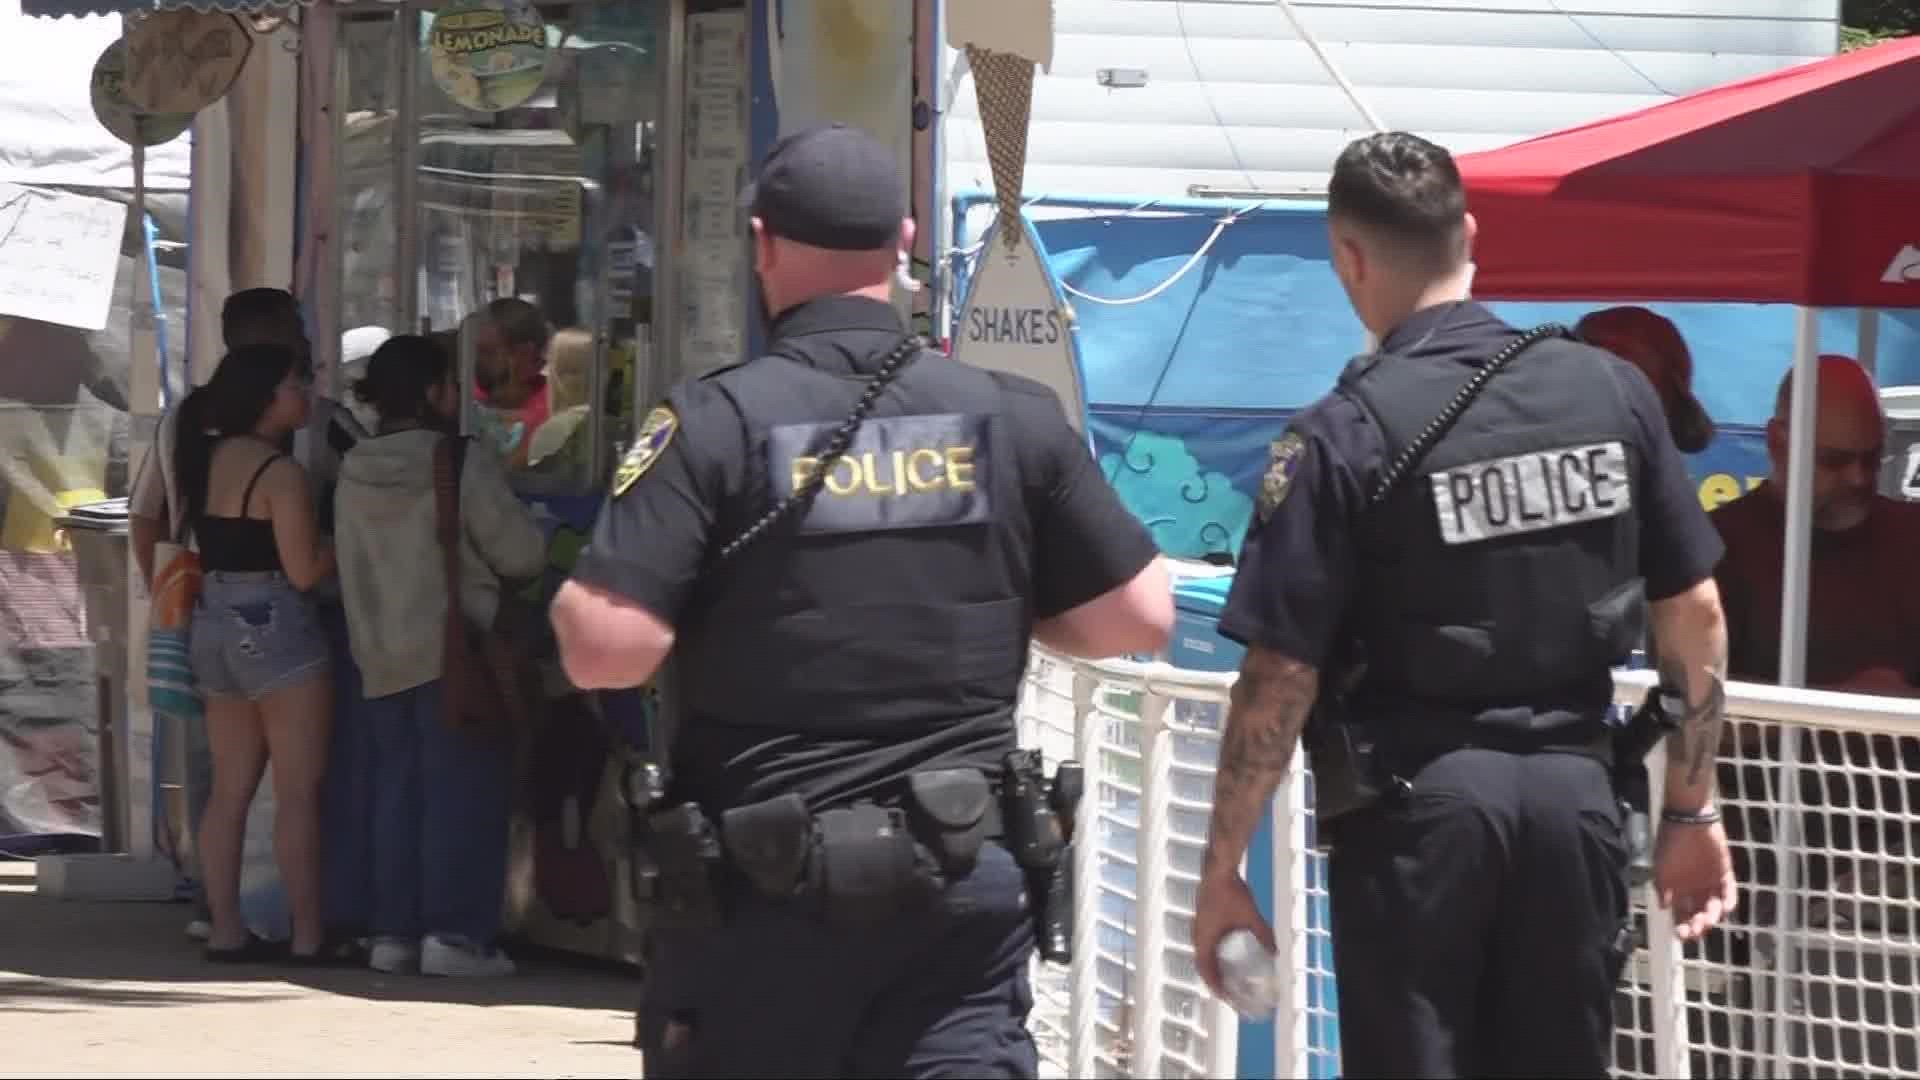 After a shooting left guests at Fiesta Days in Vacaville rattled Sunday night, families came back in droves to enjoy the carnival atmosphere on Memorial Day.